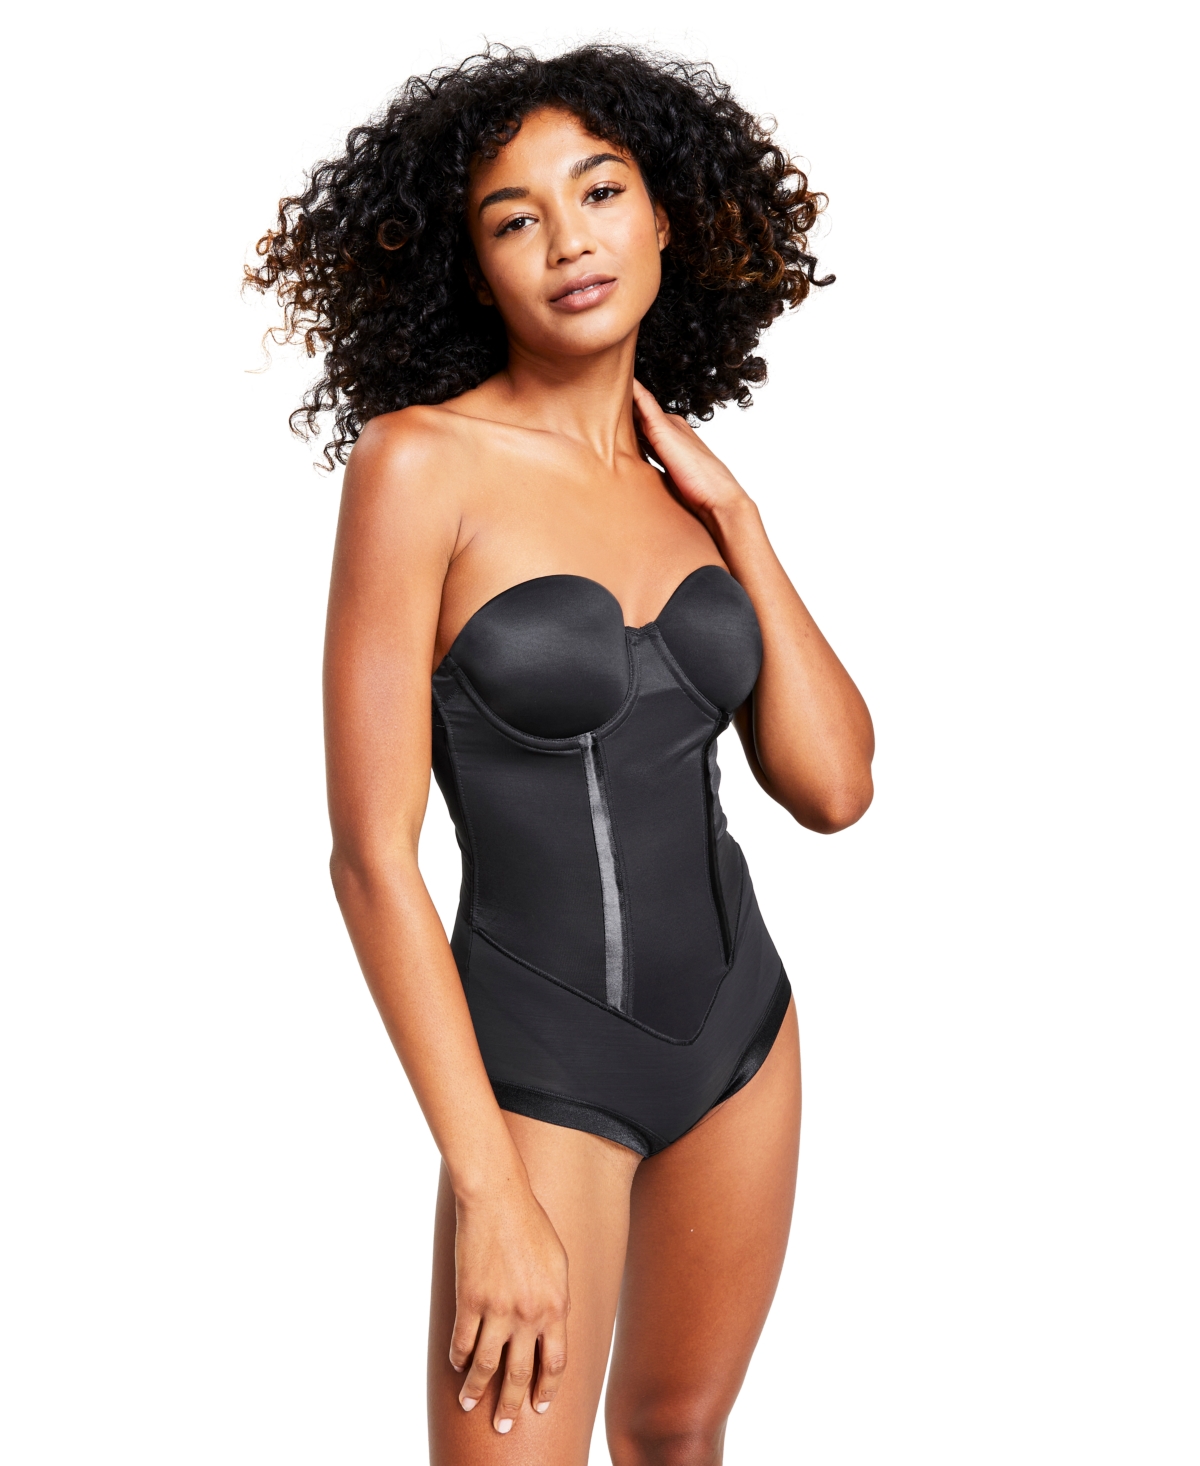 Maidenform Women's Firm Control Embellished Unlined Shaping Bodysuit1456 -  Macy's